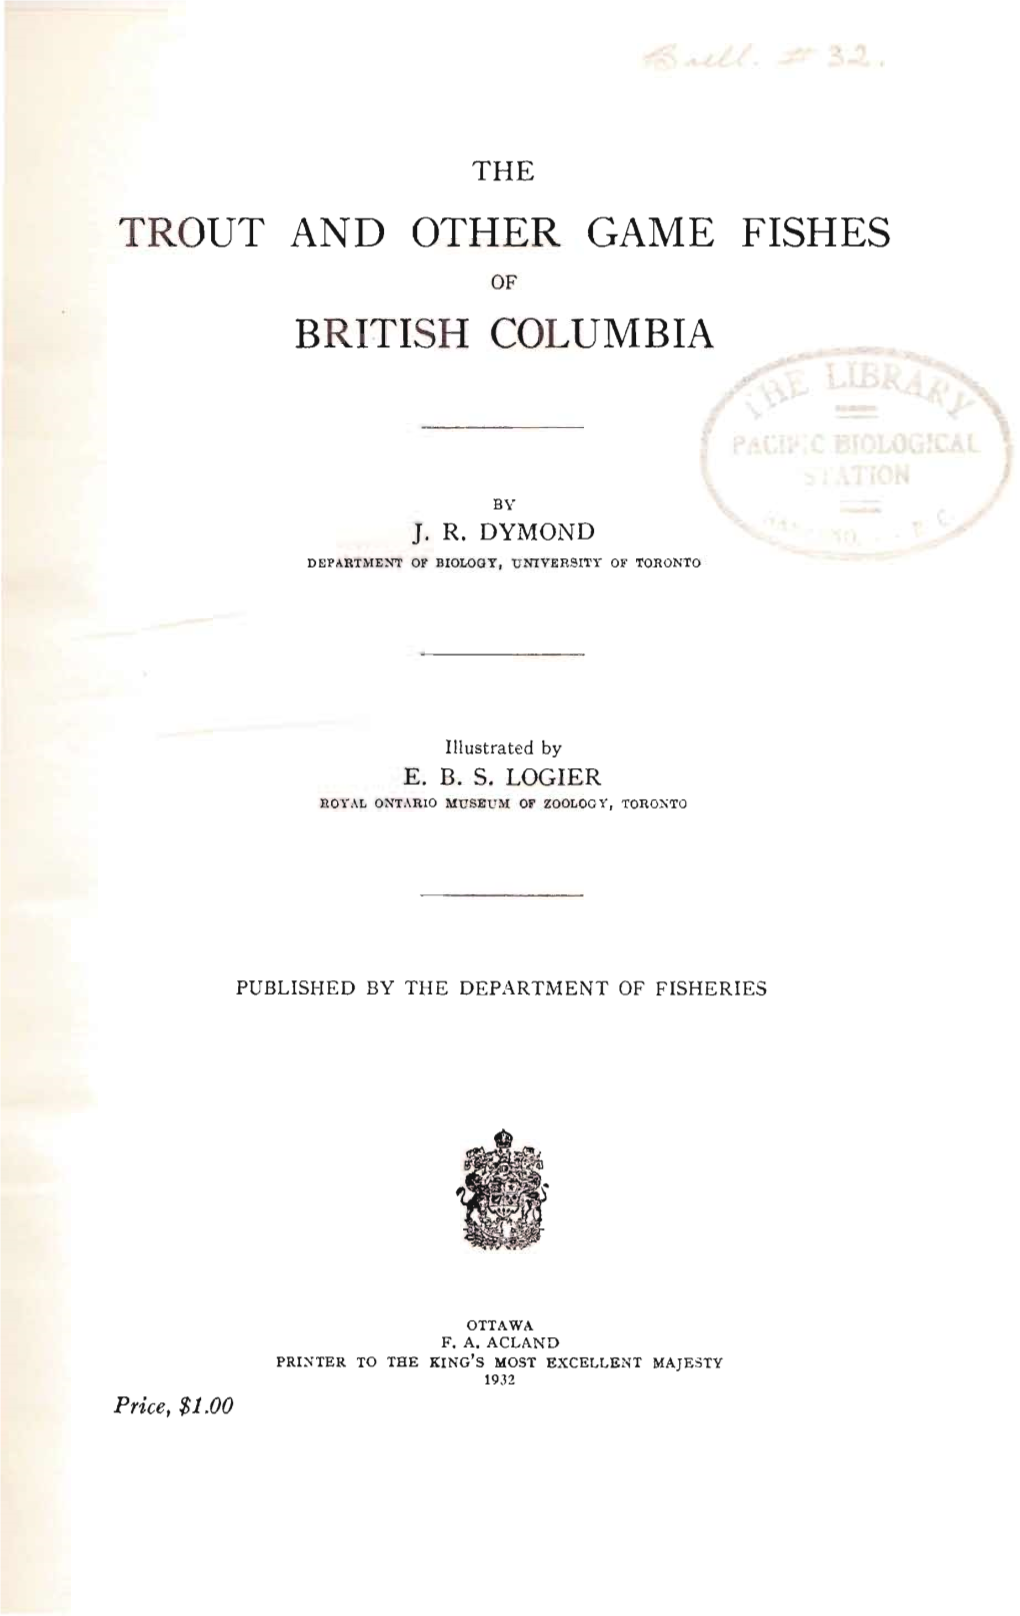 Trout and Other Game Fishes of British Columbia